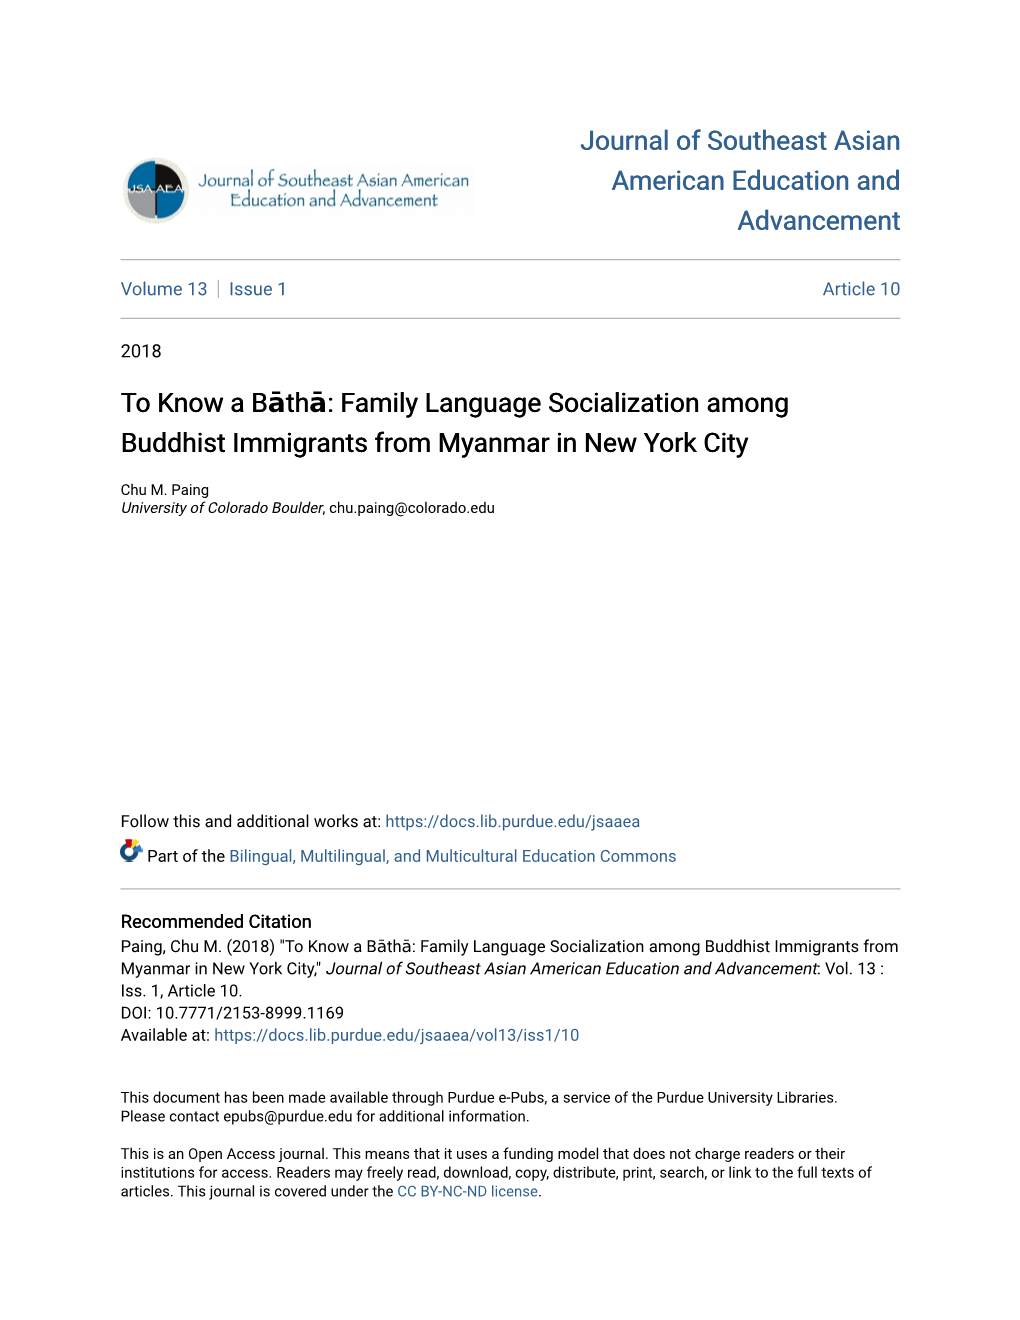 Family Language Socialization Among Buddhist Immigrants from Myanmar in New York City